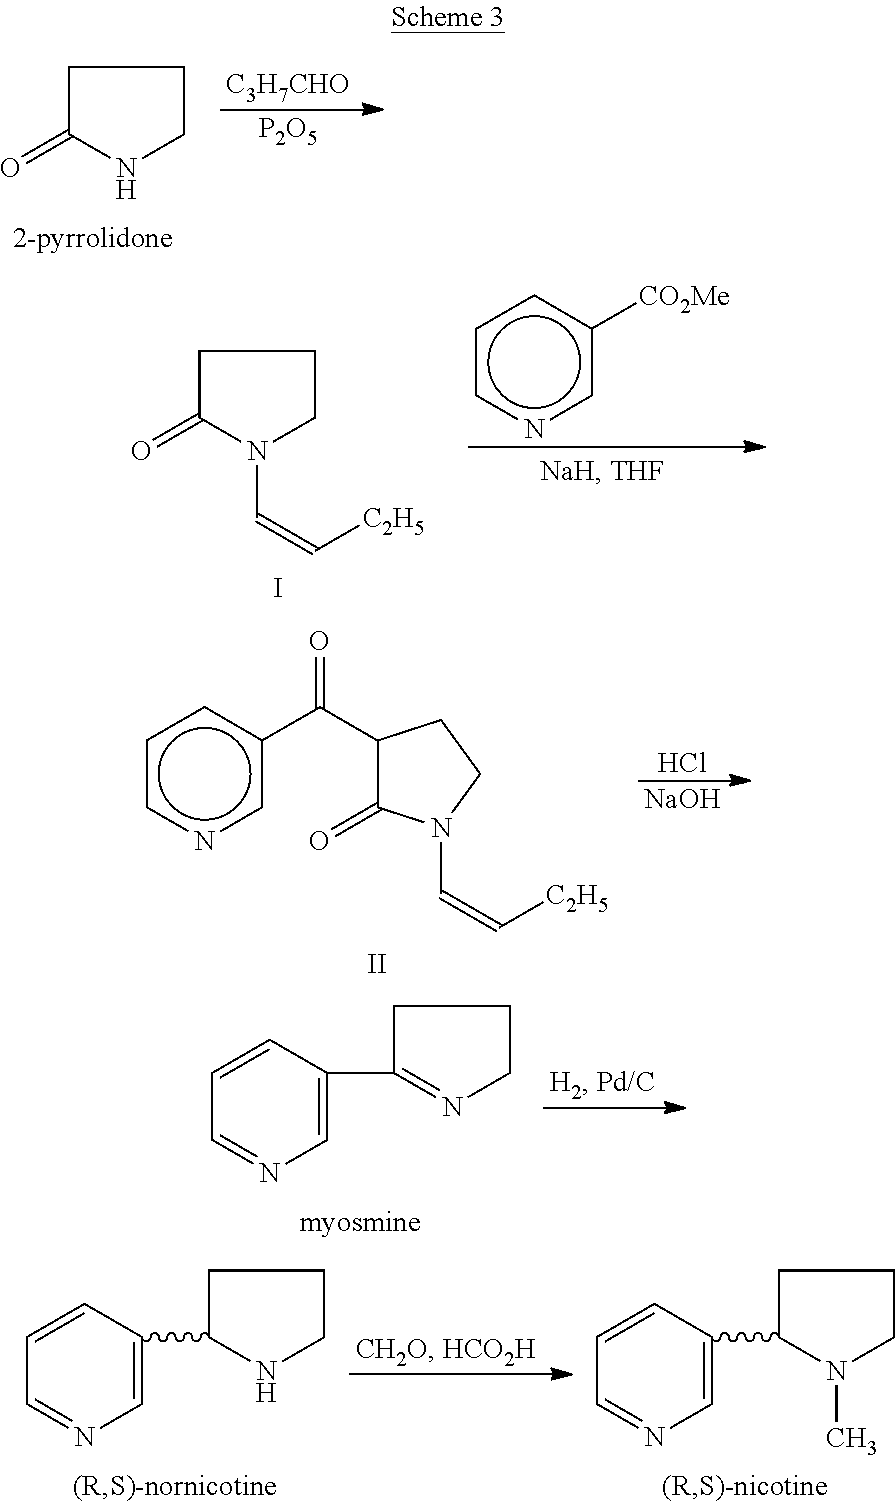 Process for the preparation of (r,s)-nicotine